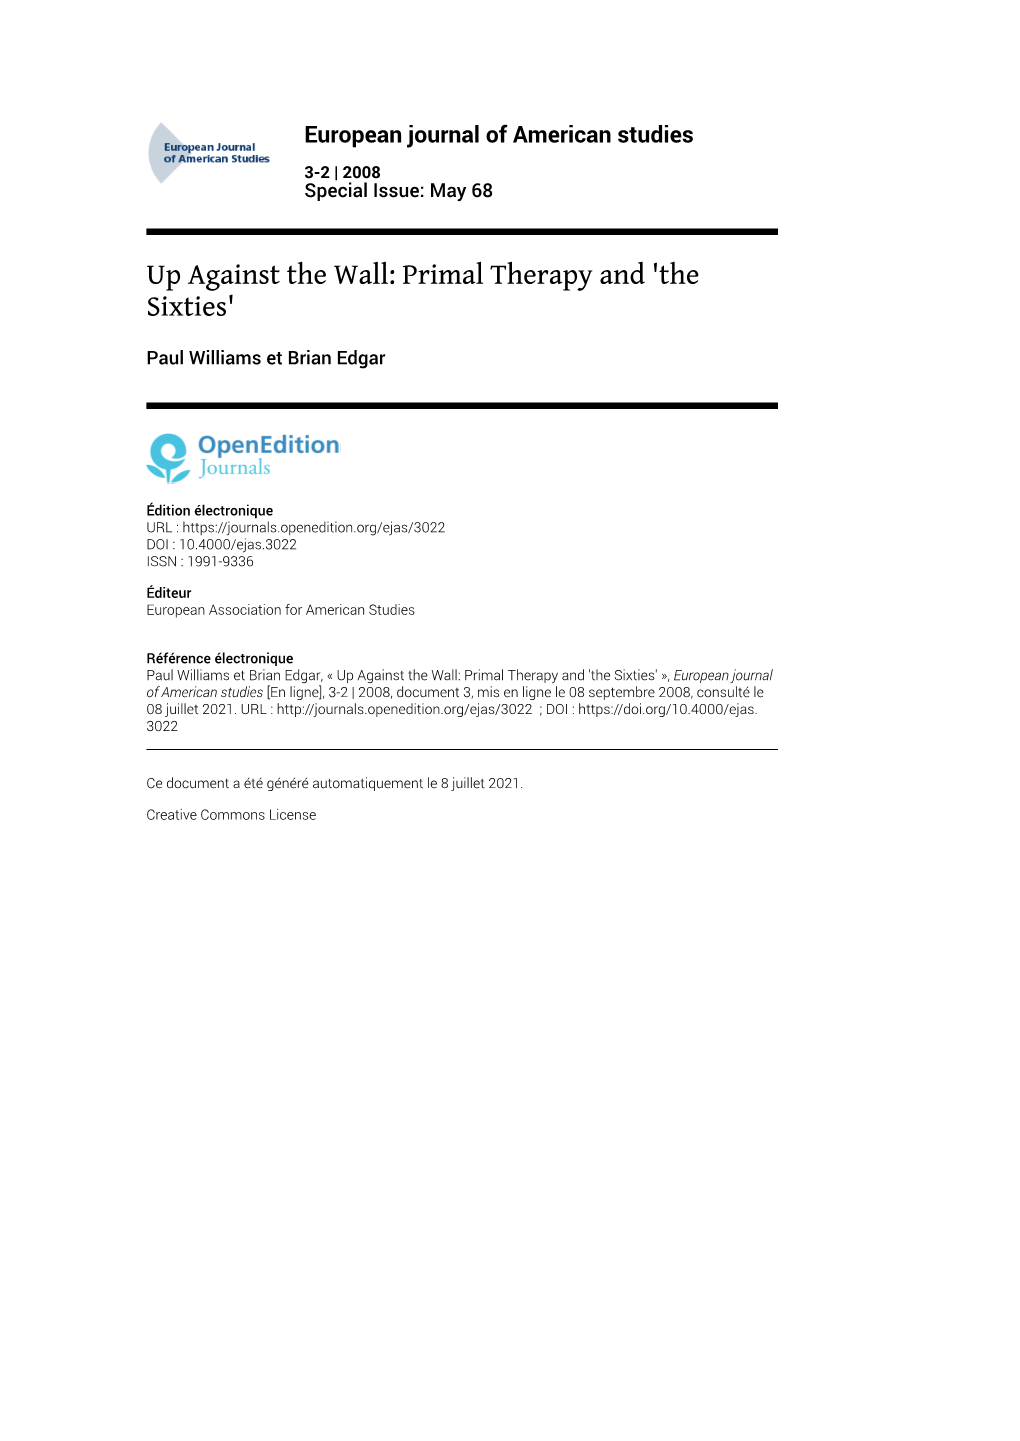 European Journal of American Studies, 3-2 | 2008 up Against the Wall: Primal Therapy and 'The Sixties' 2